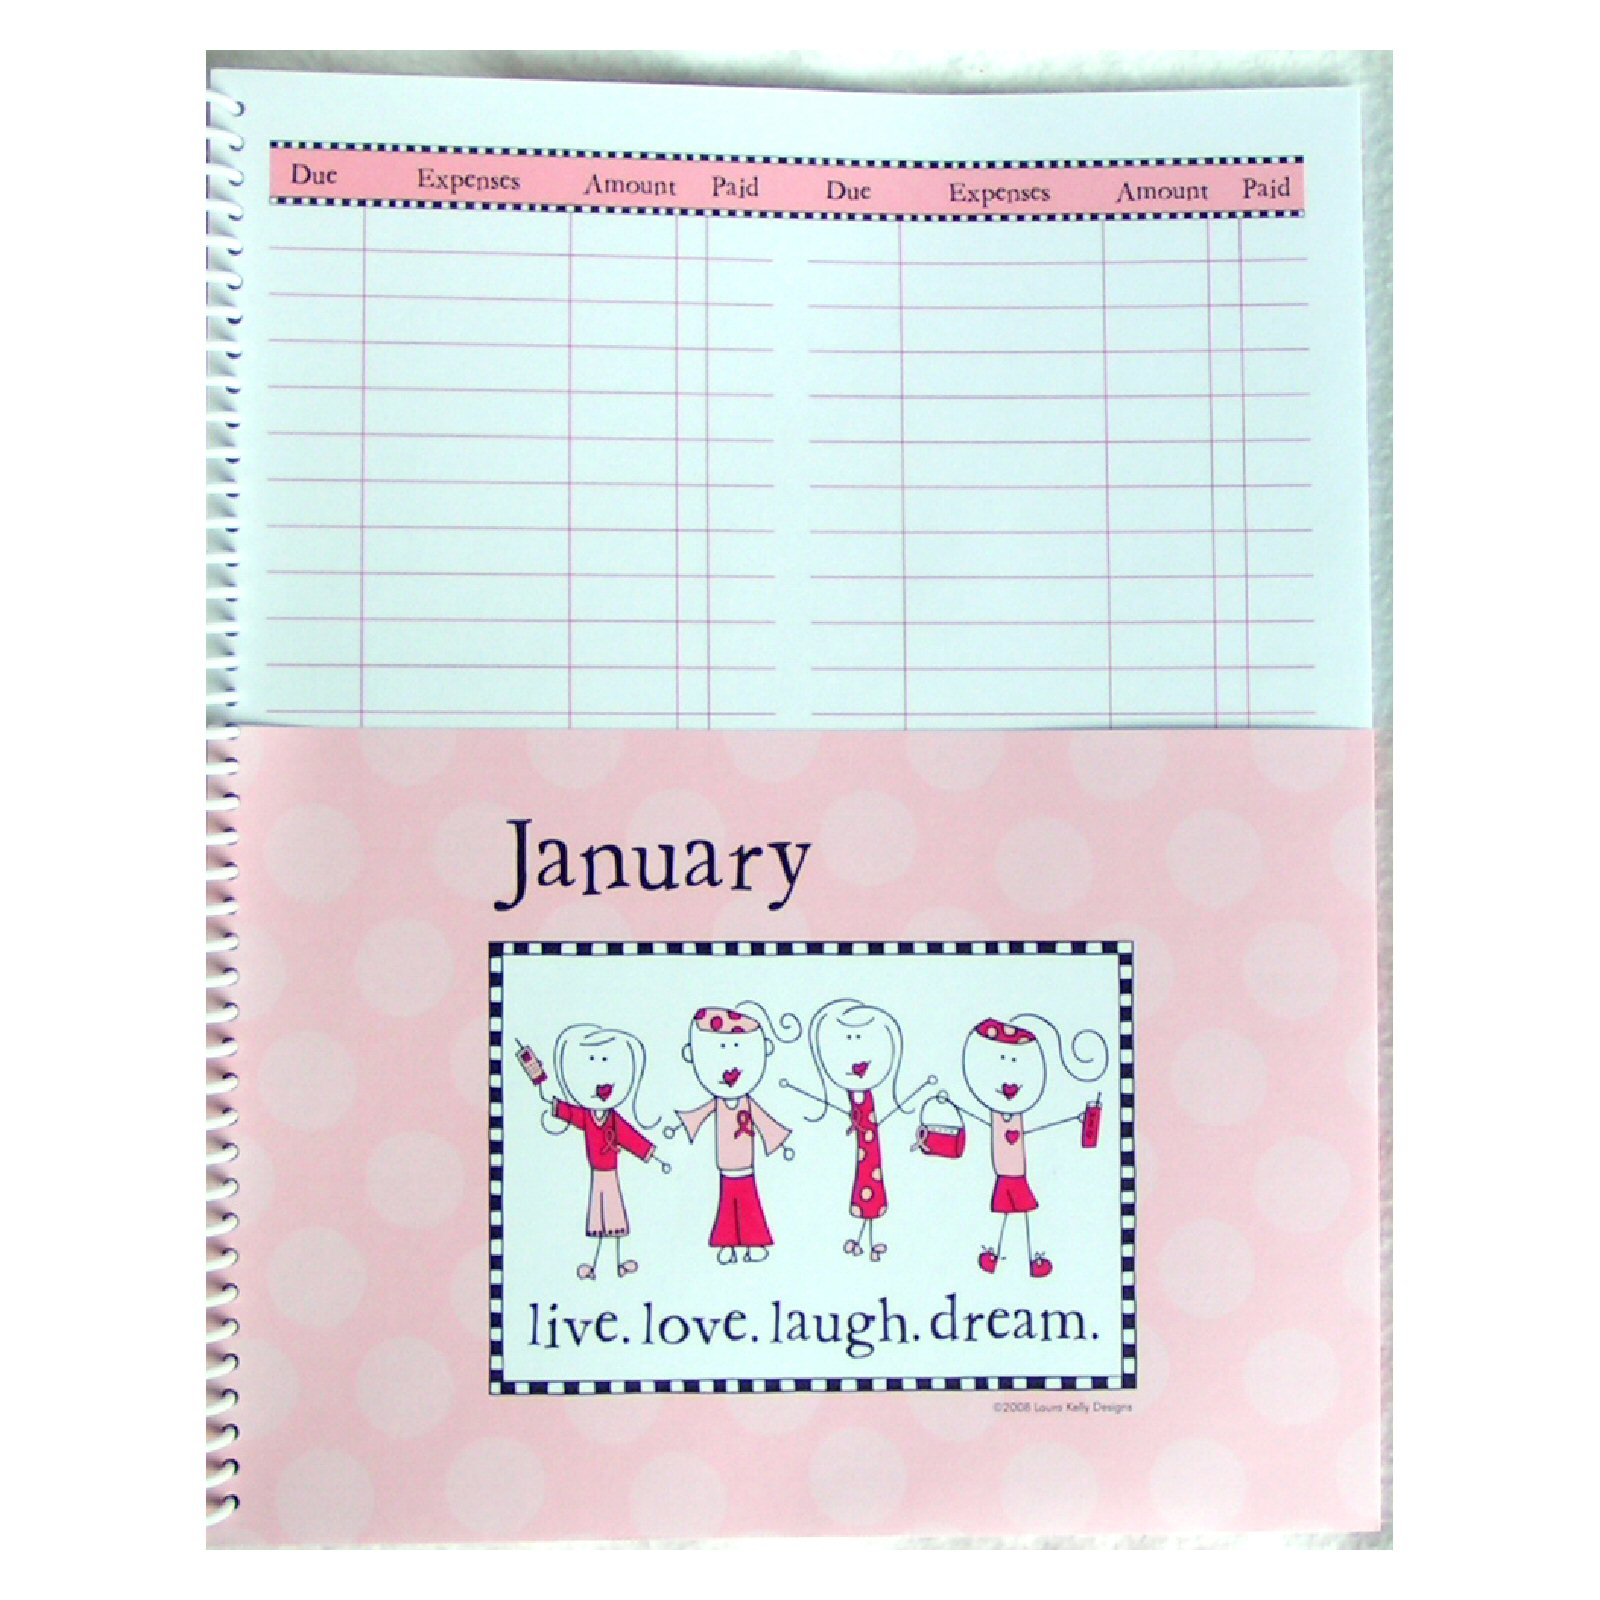 Bill Paying Organizer Budget Book w/ Pockets - Live, Laugh, Love - Click Image to Close